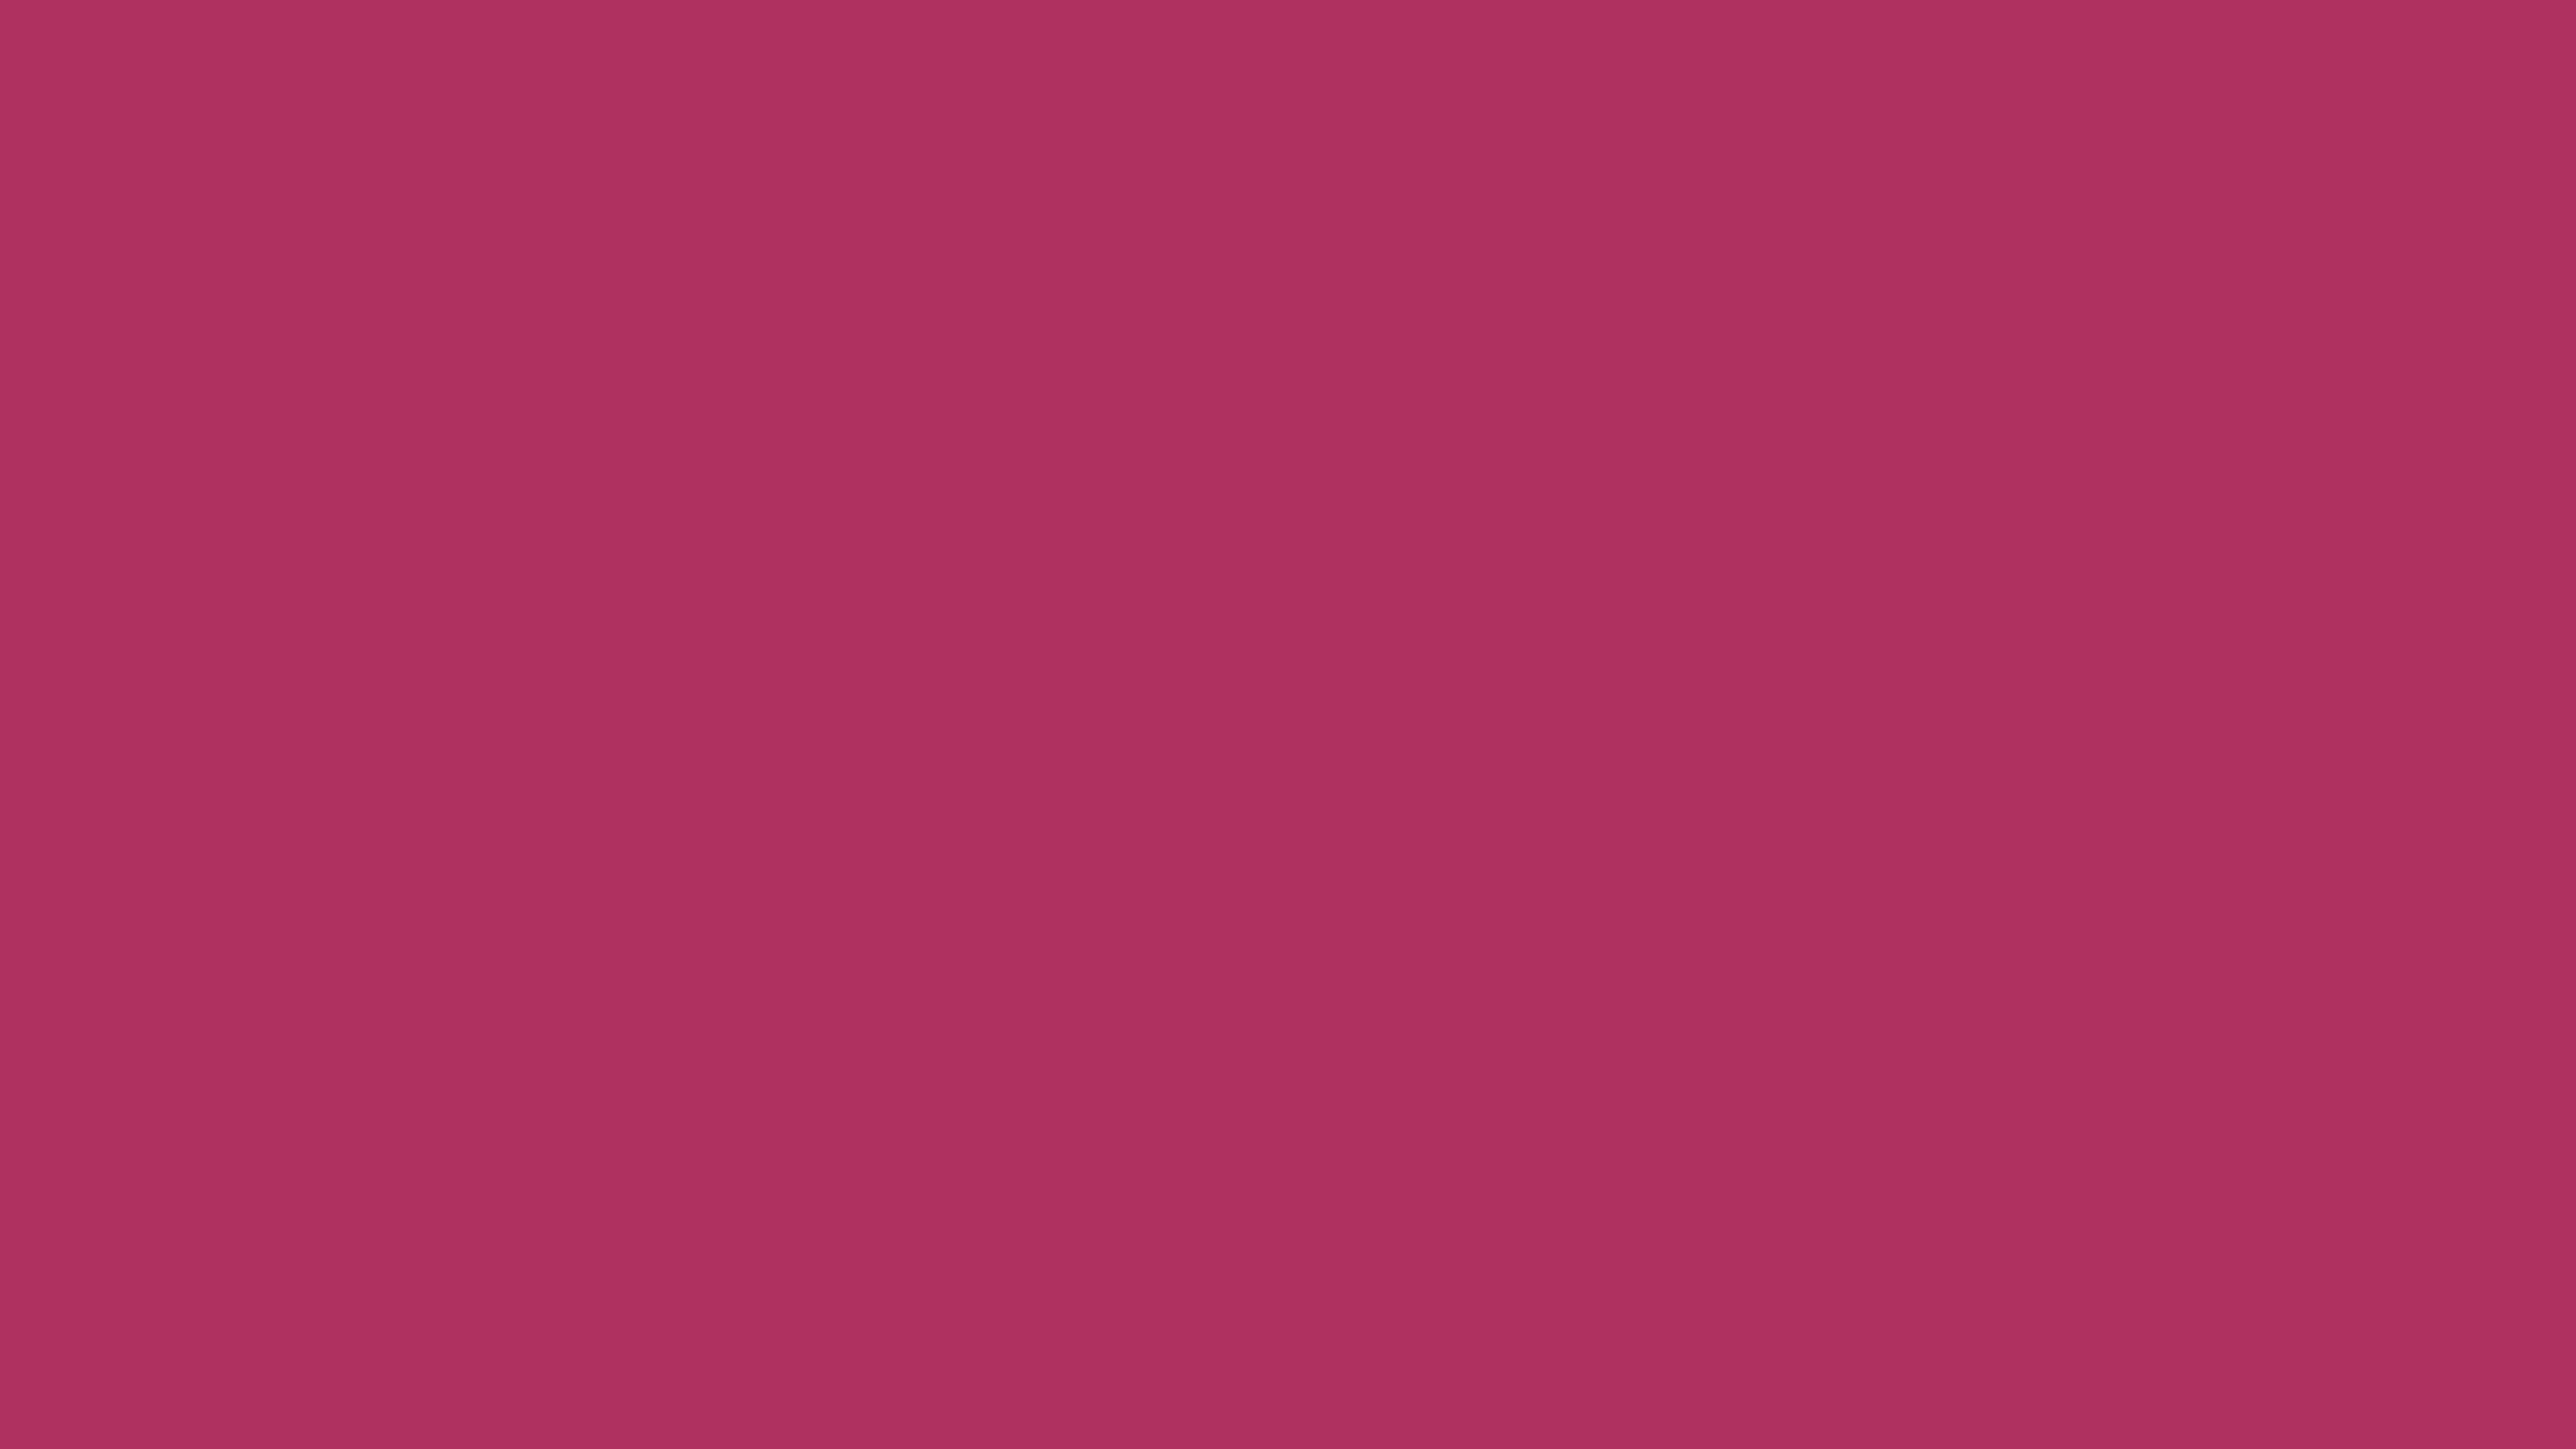 7680x4320 Maroon X11 Gui Solid Color Background